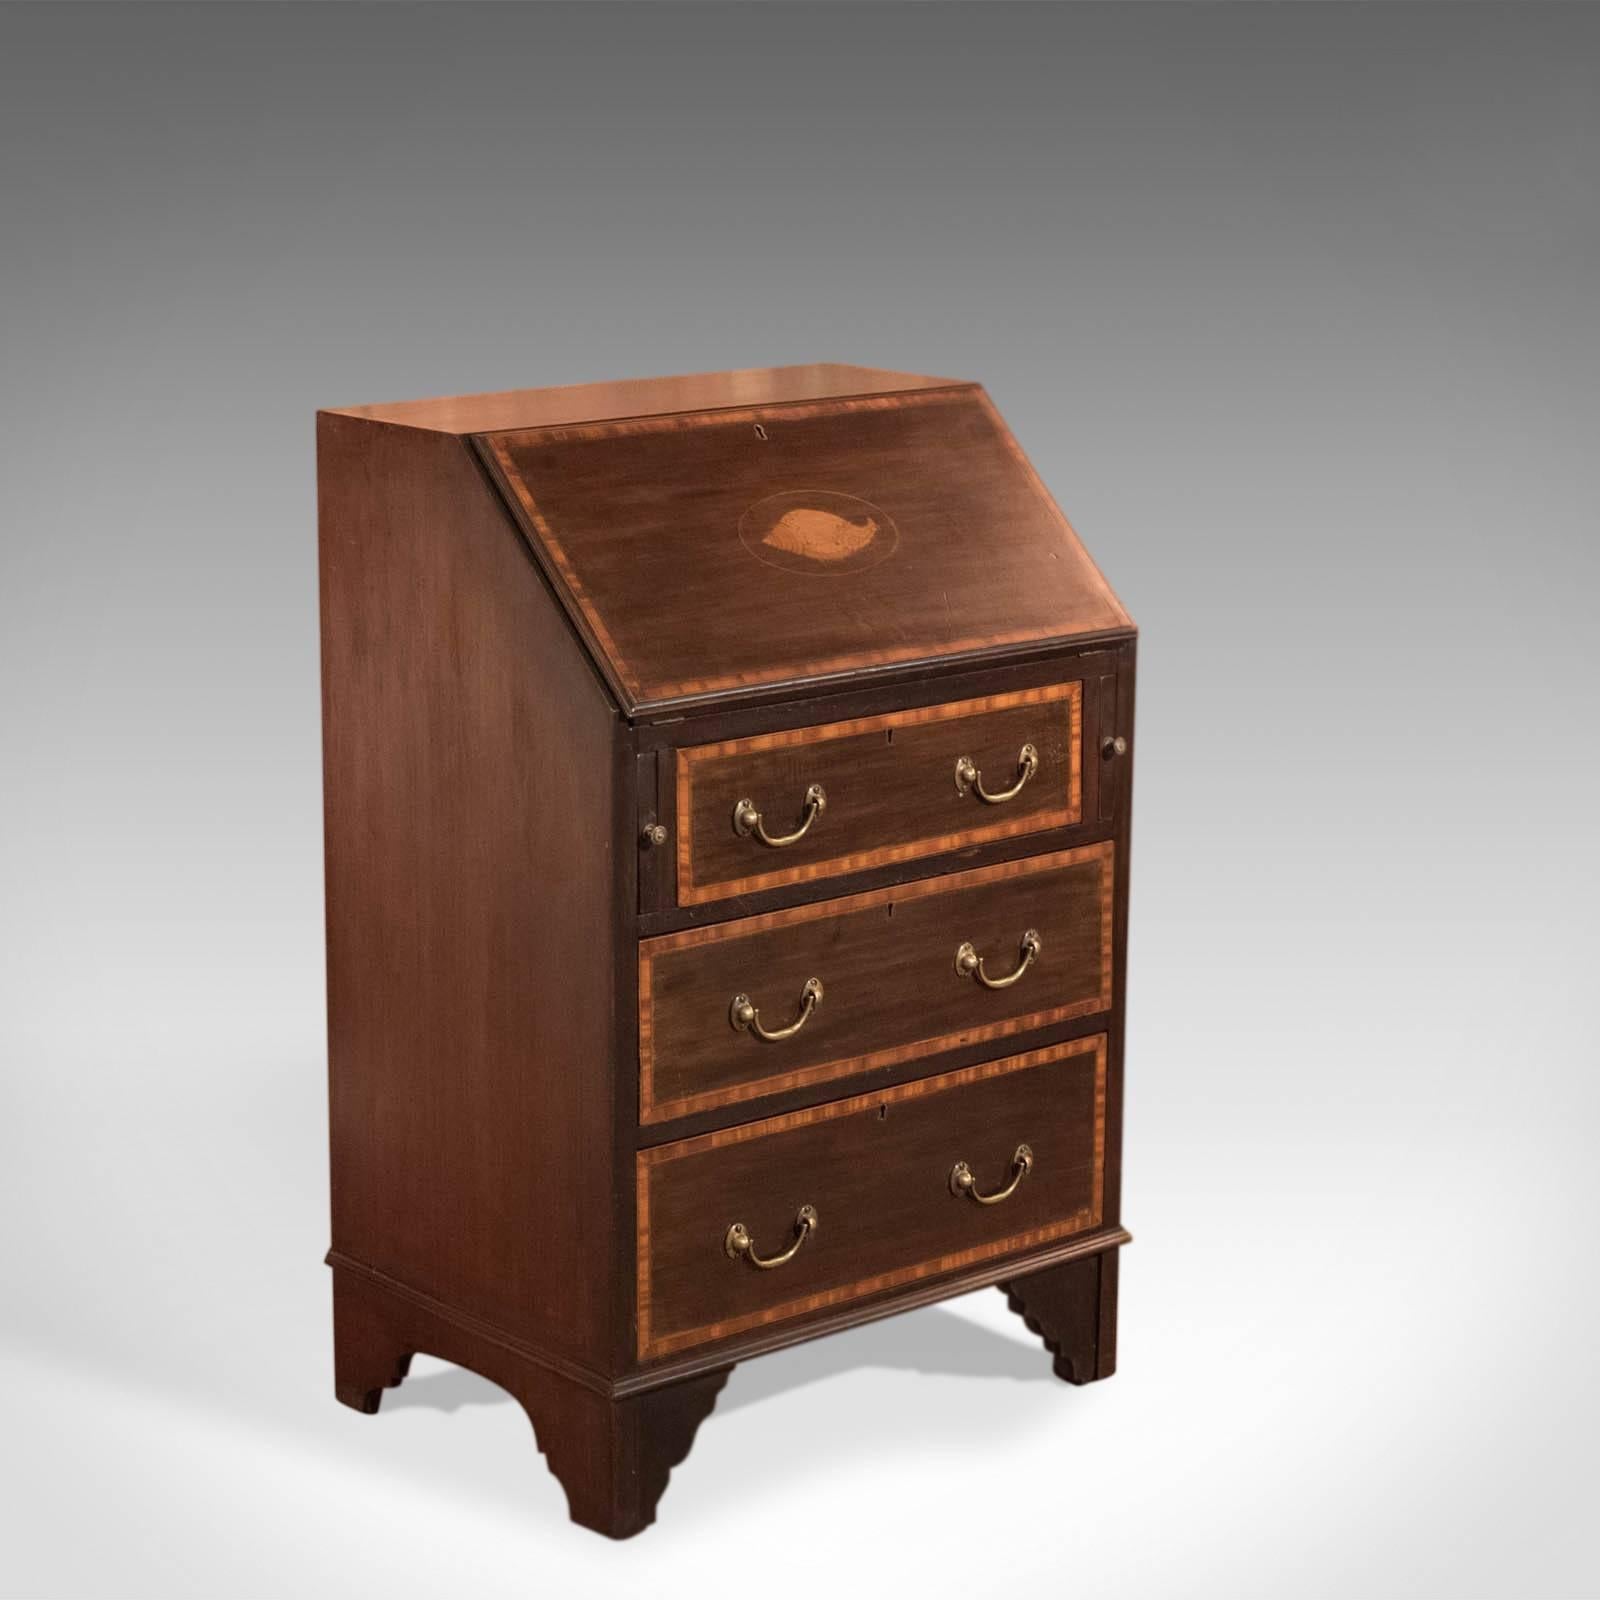 This is an antique, Edwardian bureau dating to circa 1910.

Raised on bracket feet this compact bureau is finished in a deep, russet mahogany with good graining and consistent color.

The locking fall is decorated with an inlaid conche motif and